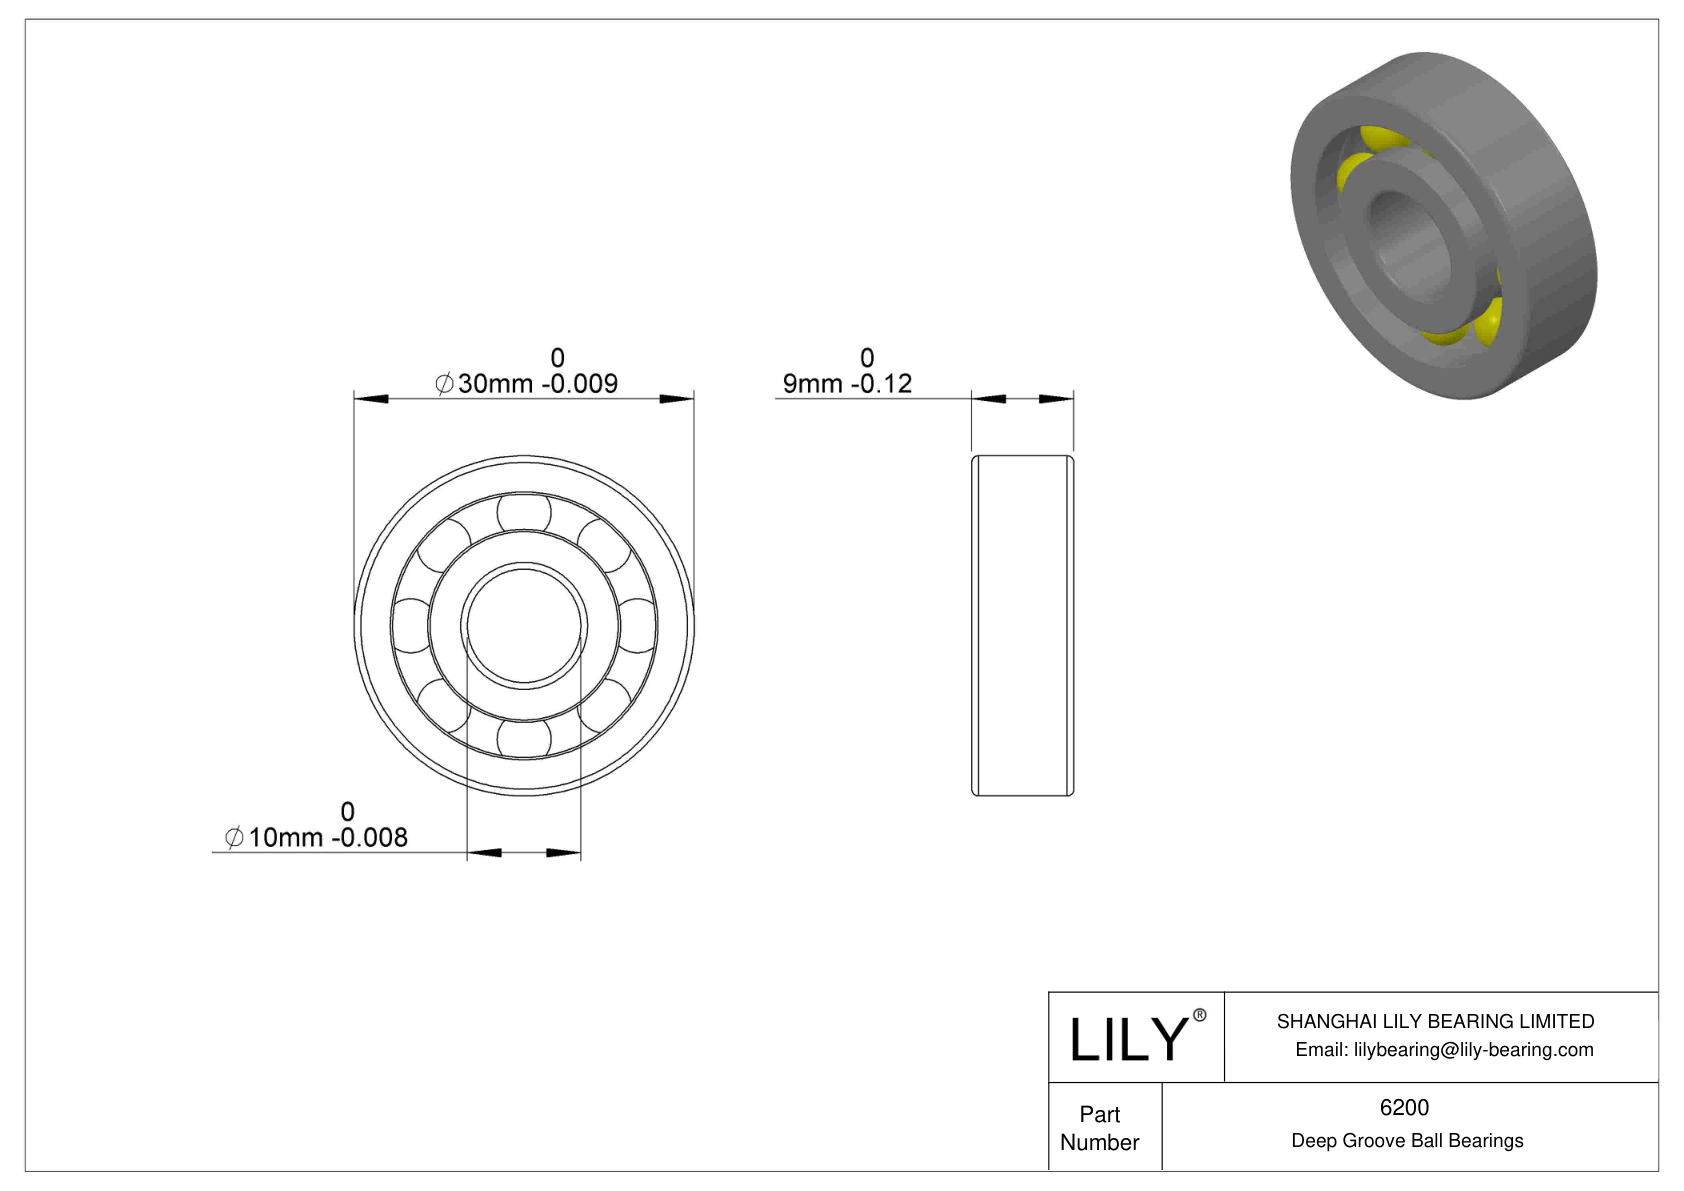 LILY-PU620050-12C2L12M8 Polyurethane Coated Bearing With Screw cad drawing